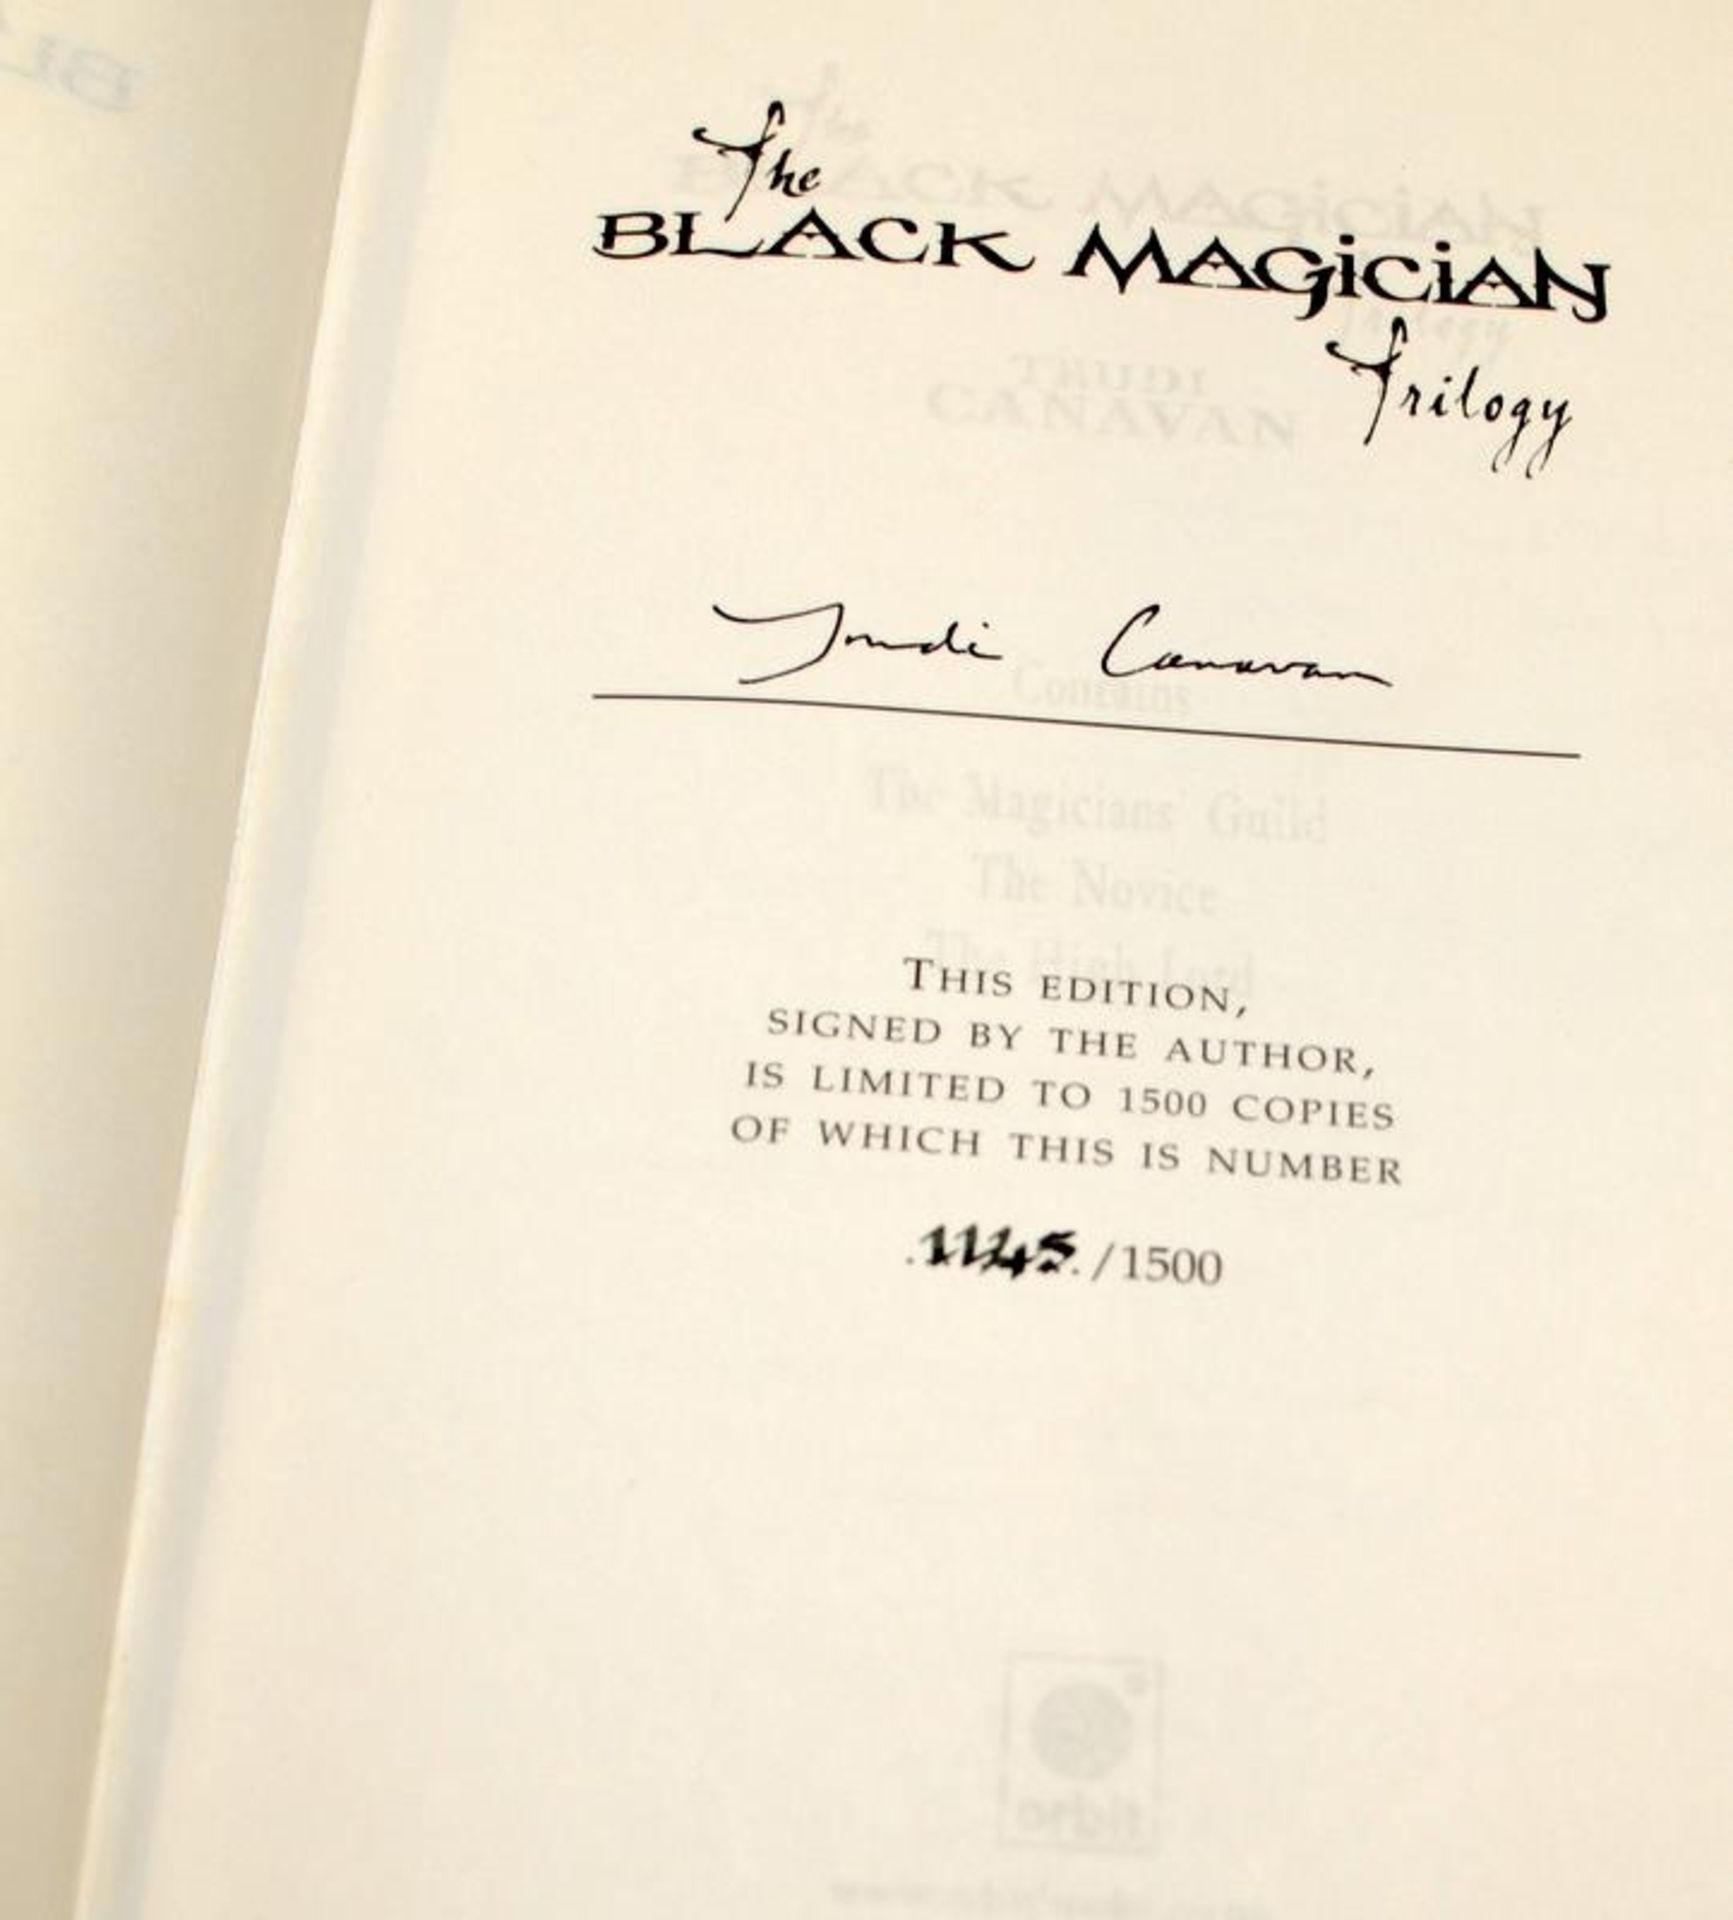 The Black Magician Trilogy by Trudi Canavan hardback book with slipcase. Signed and numbered edition - Image 3 of 4